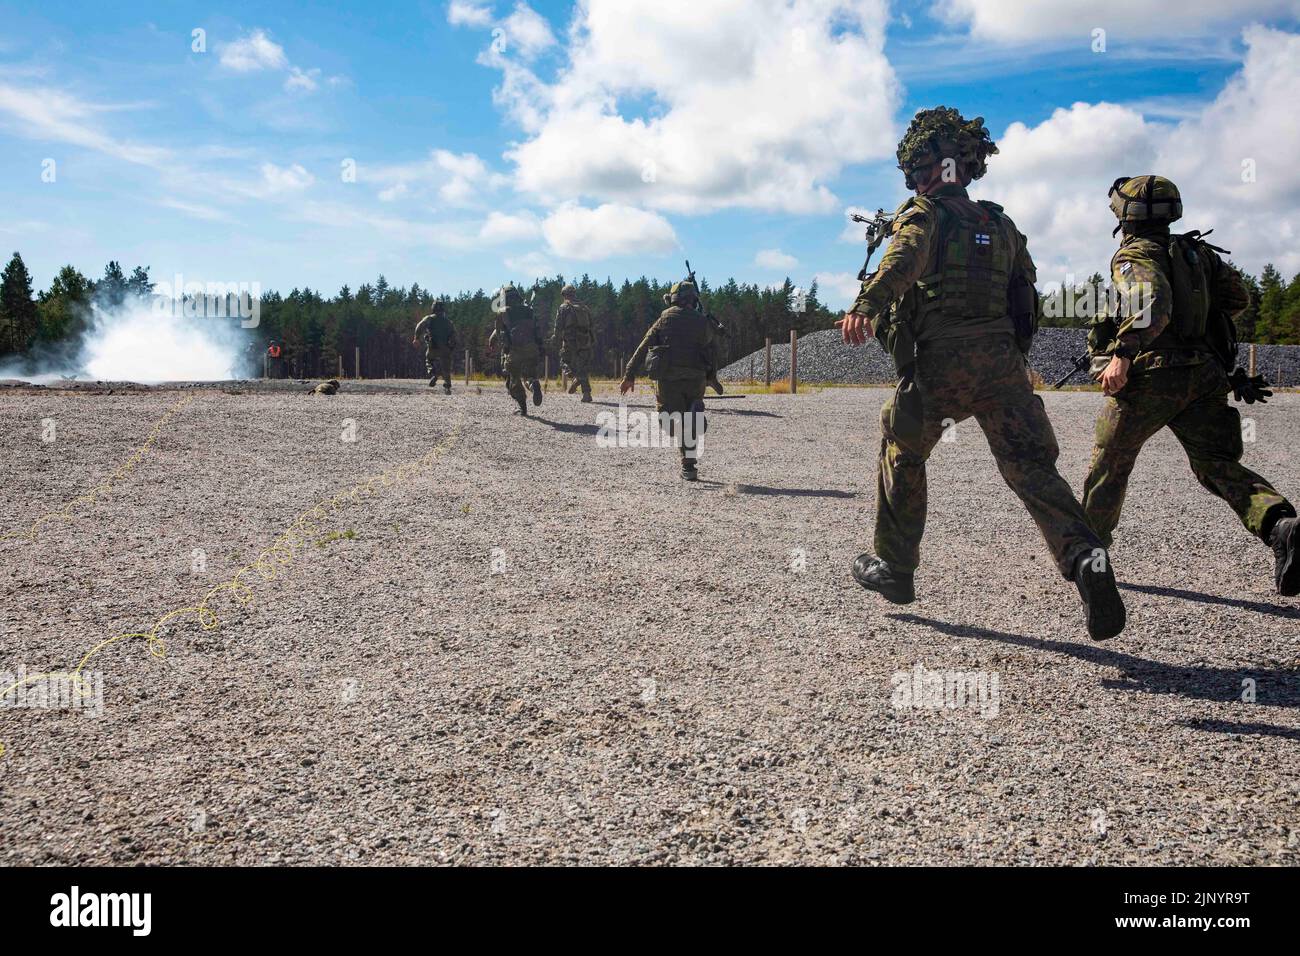 U.S. Marines assigned to Logistics Combat Element, 22nd Marine Expeditionary Unit (MEU), and Finnish soldiers from Nyland Brigade, run to provide security after detonating a bangalore torpedo explosive charge during demolition training in Syndalen, Finland, Aug. 11, 2022. The range was part of a bi-lateral exercise between the Finnish military and 22nd MEU. The Kearsarge Amphibious Ready Group and 22nd MEU, under the command and control of Task Force 61/2, is on a scheduled deployment in the U.S. Naval Forces Europe area of operations, employed by U.S. Sixth Fleet to defend U.S., allied and pa Stock Photo